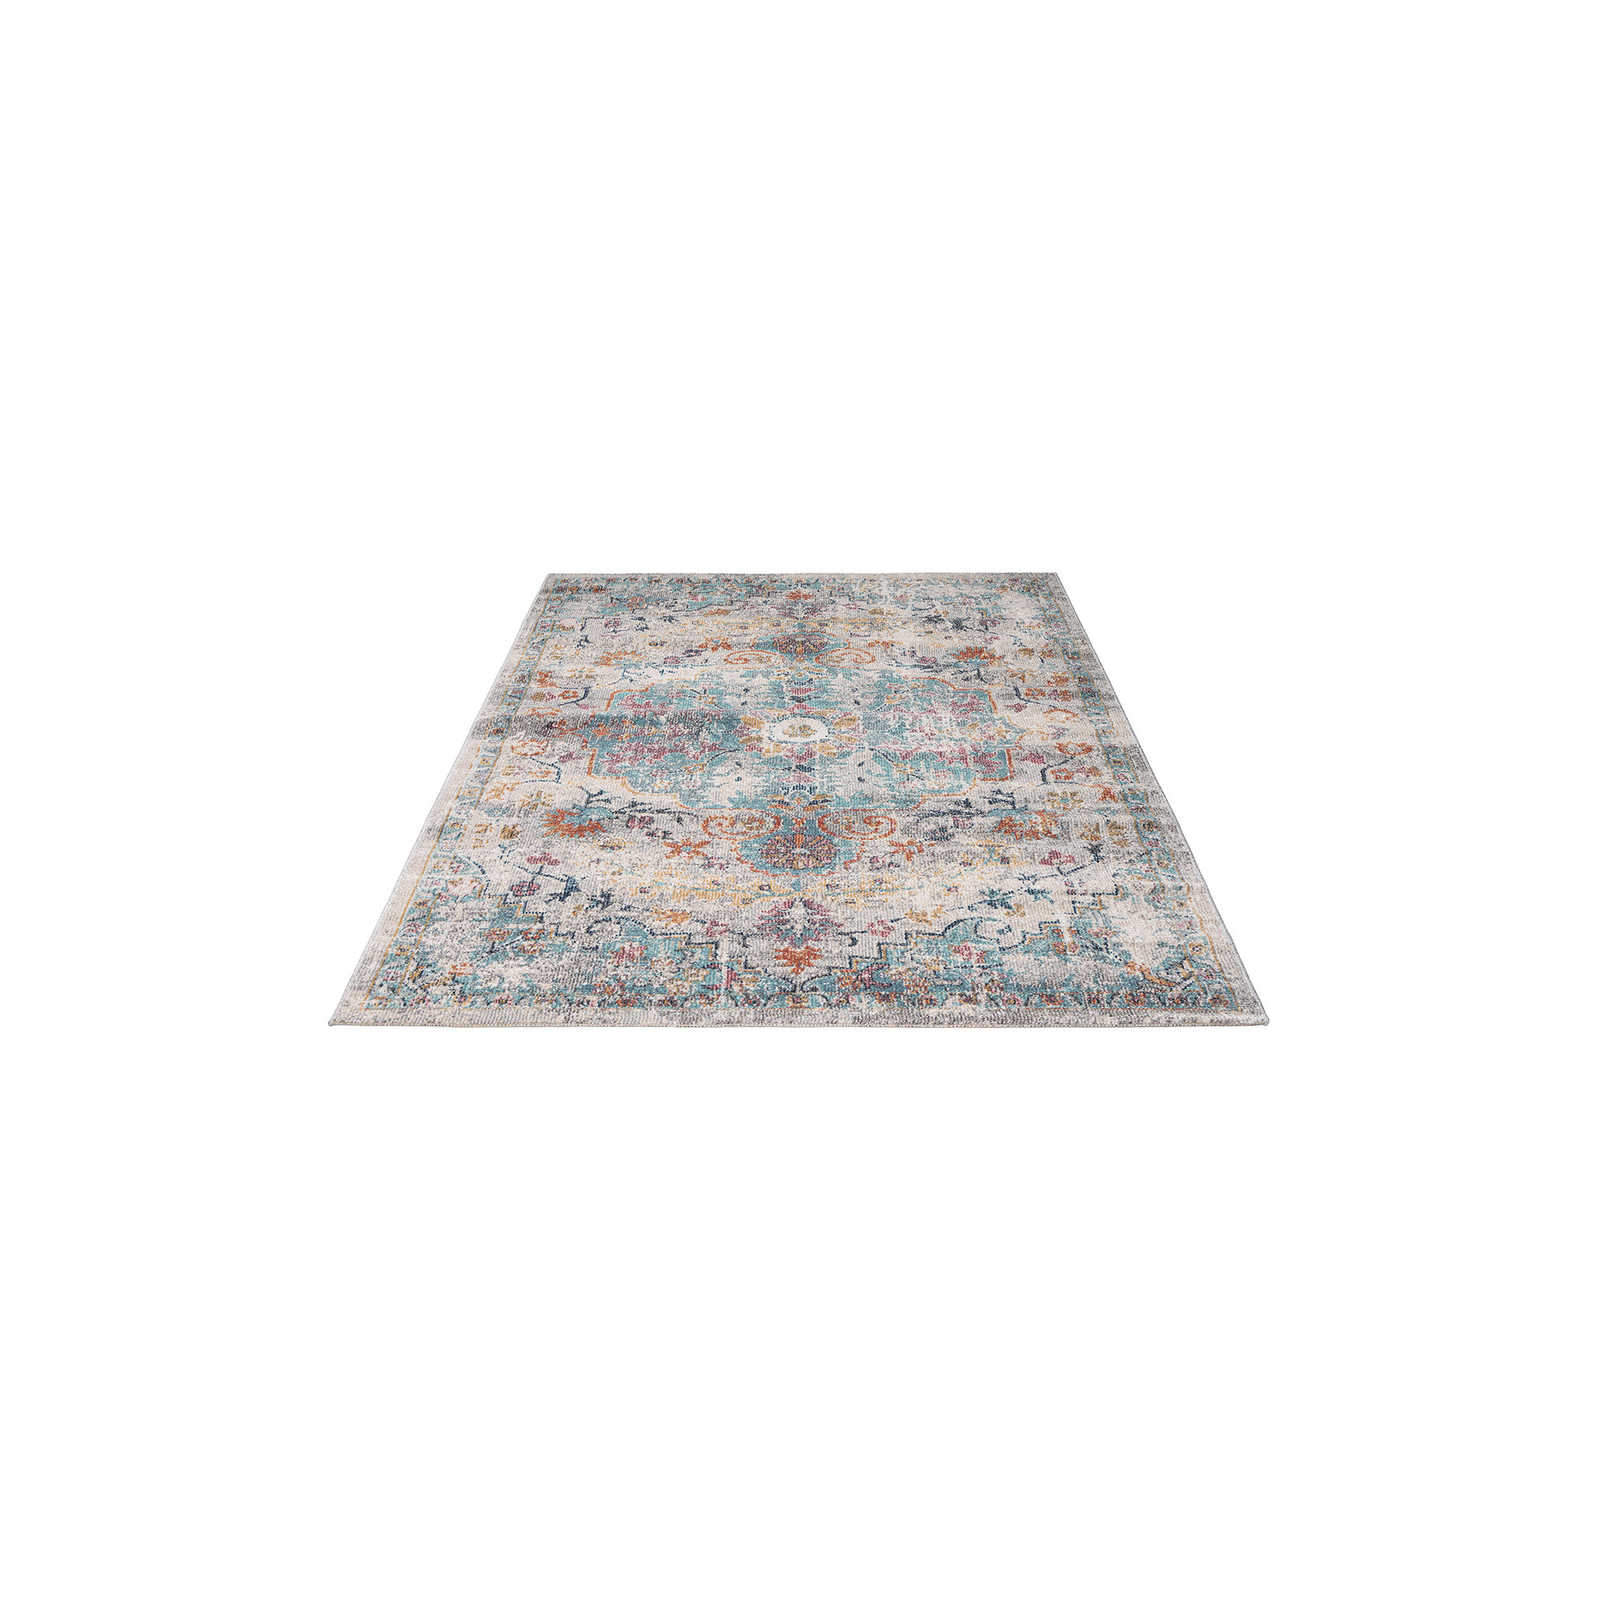 Easy Care Outdoor Rug Colourful - 200 x 140 cm
